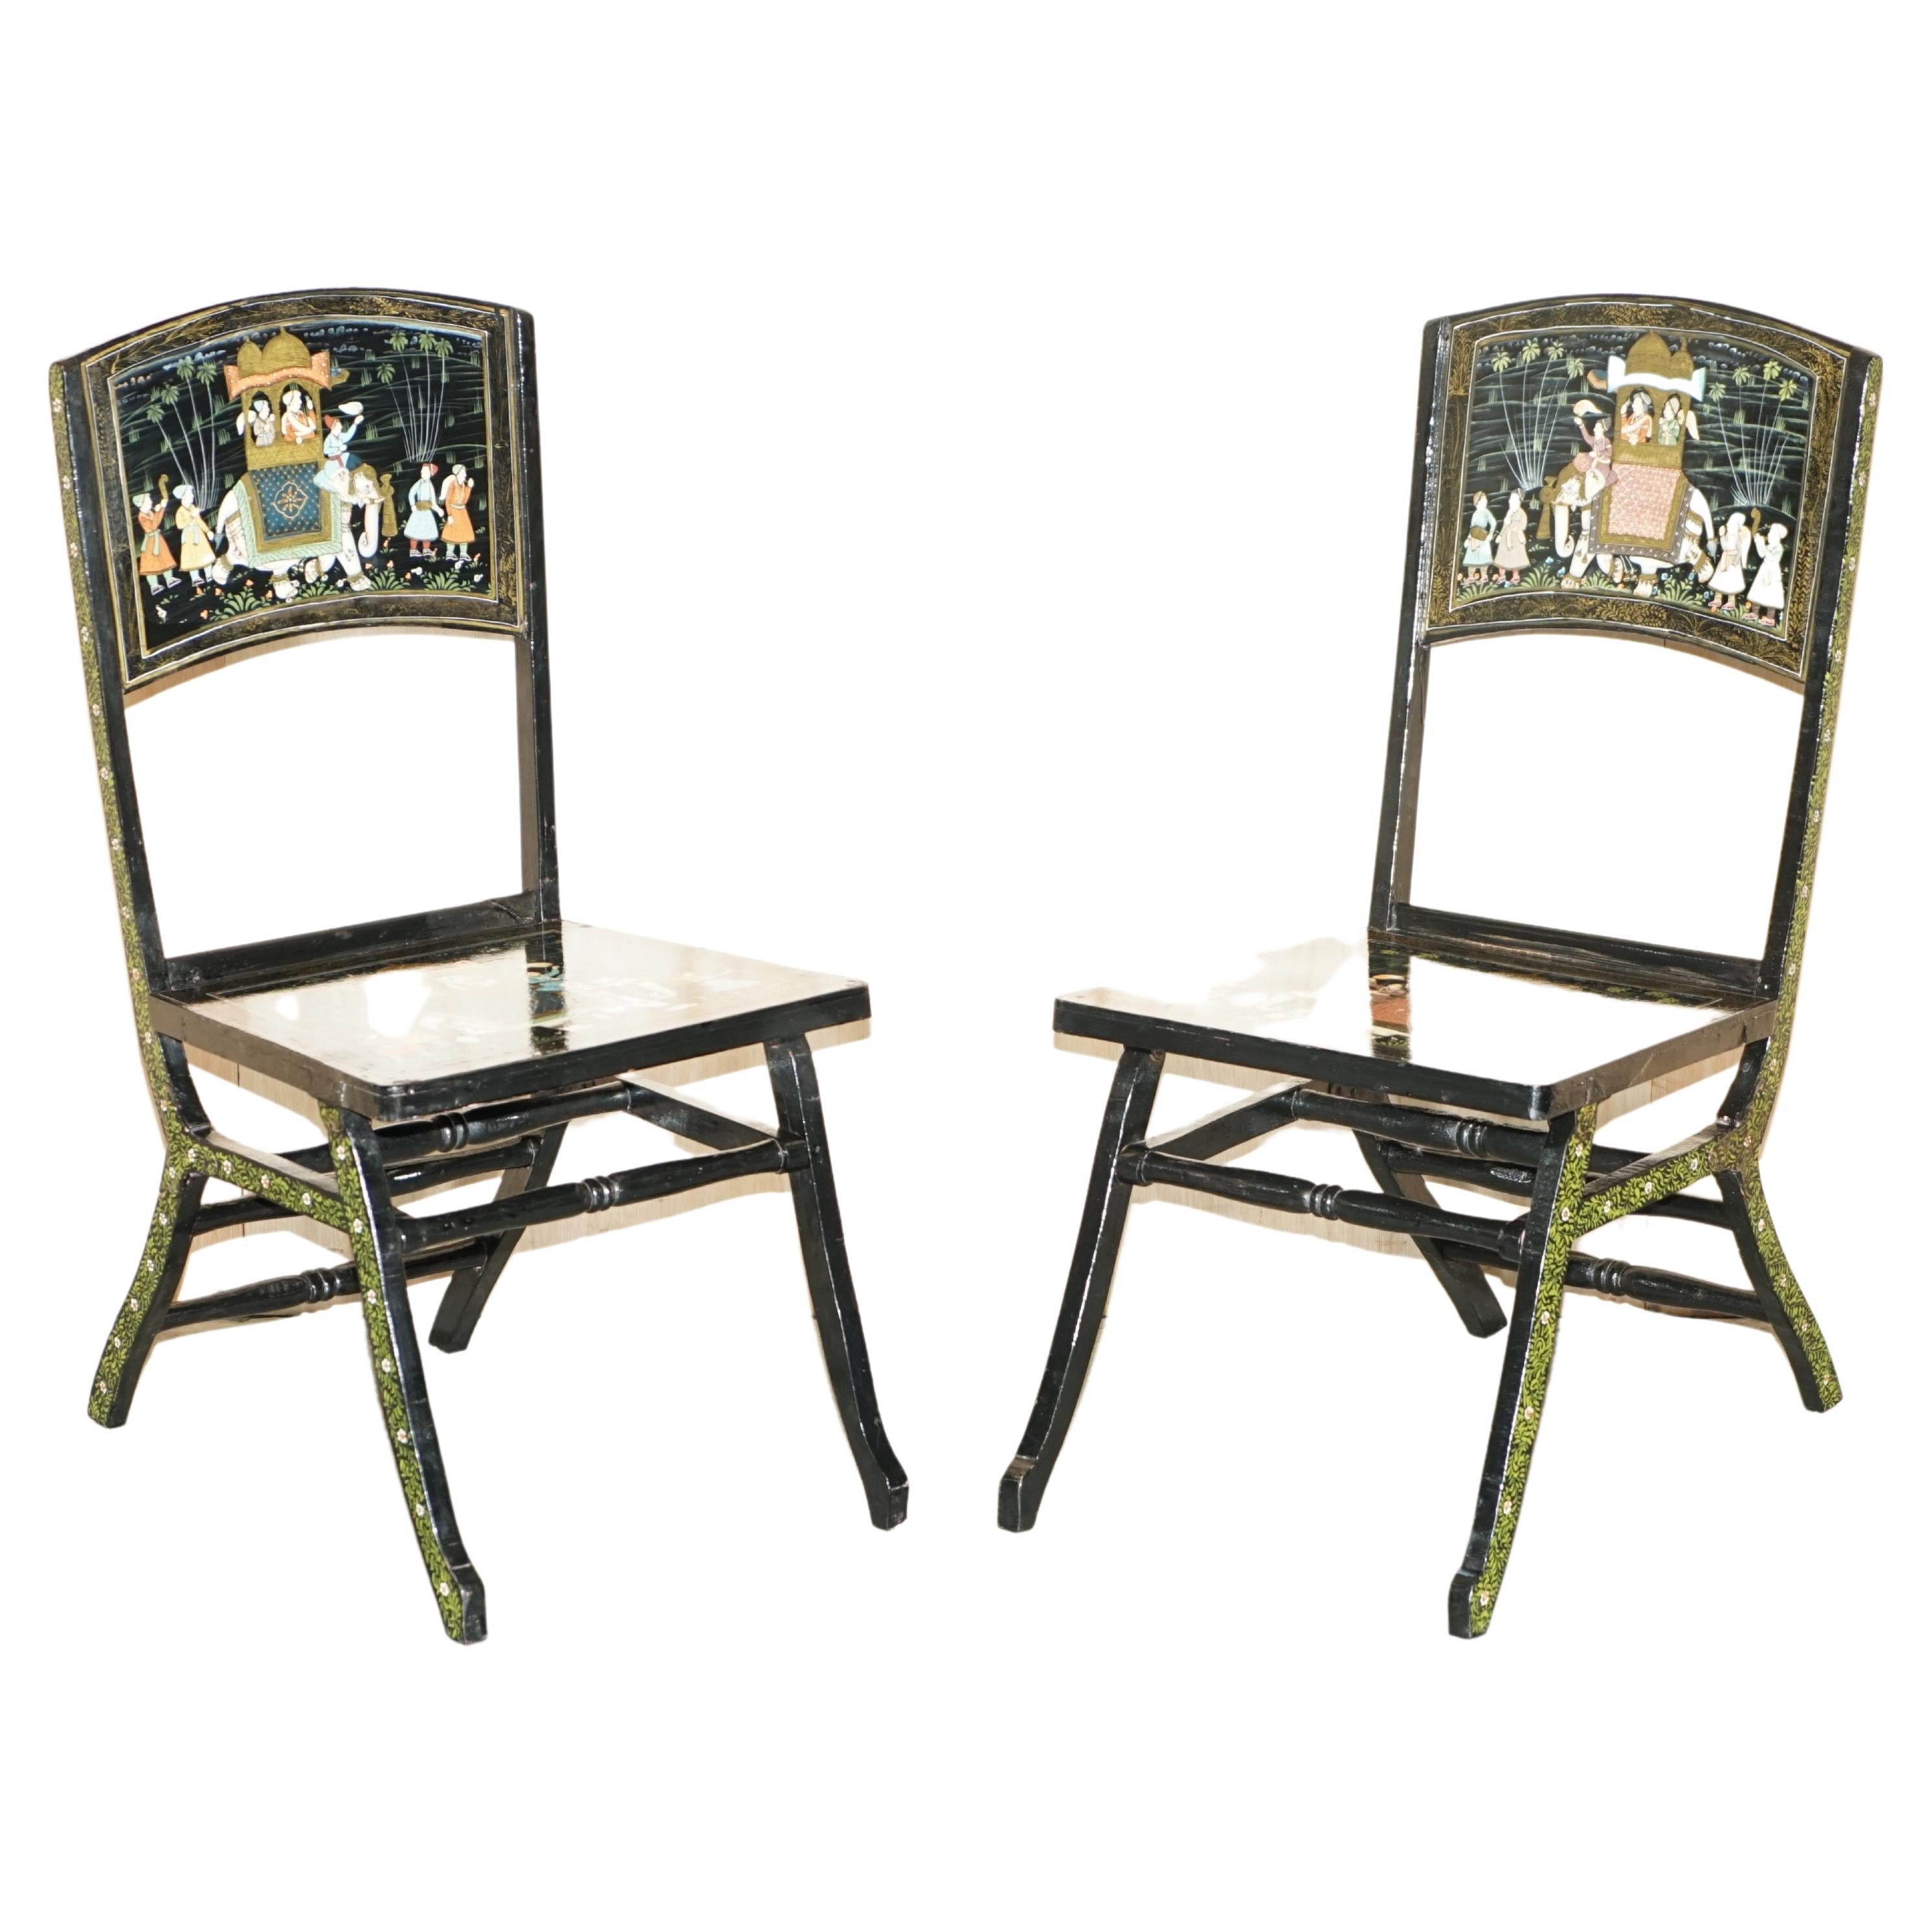 Pair of Antique Chinese Chinoiserie Indian Decoration Campaign Folding Chairs For Sale